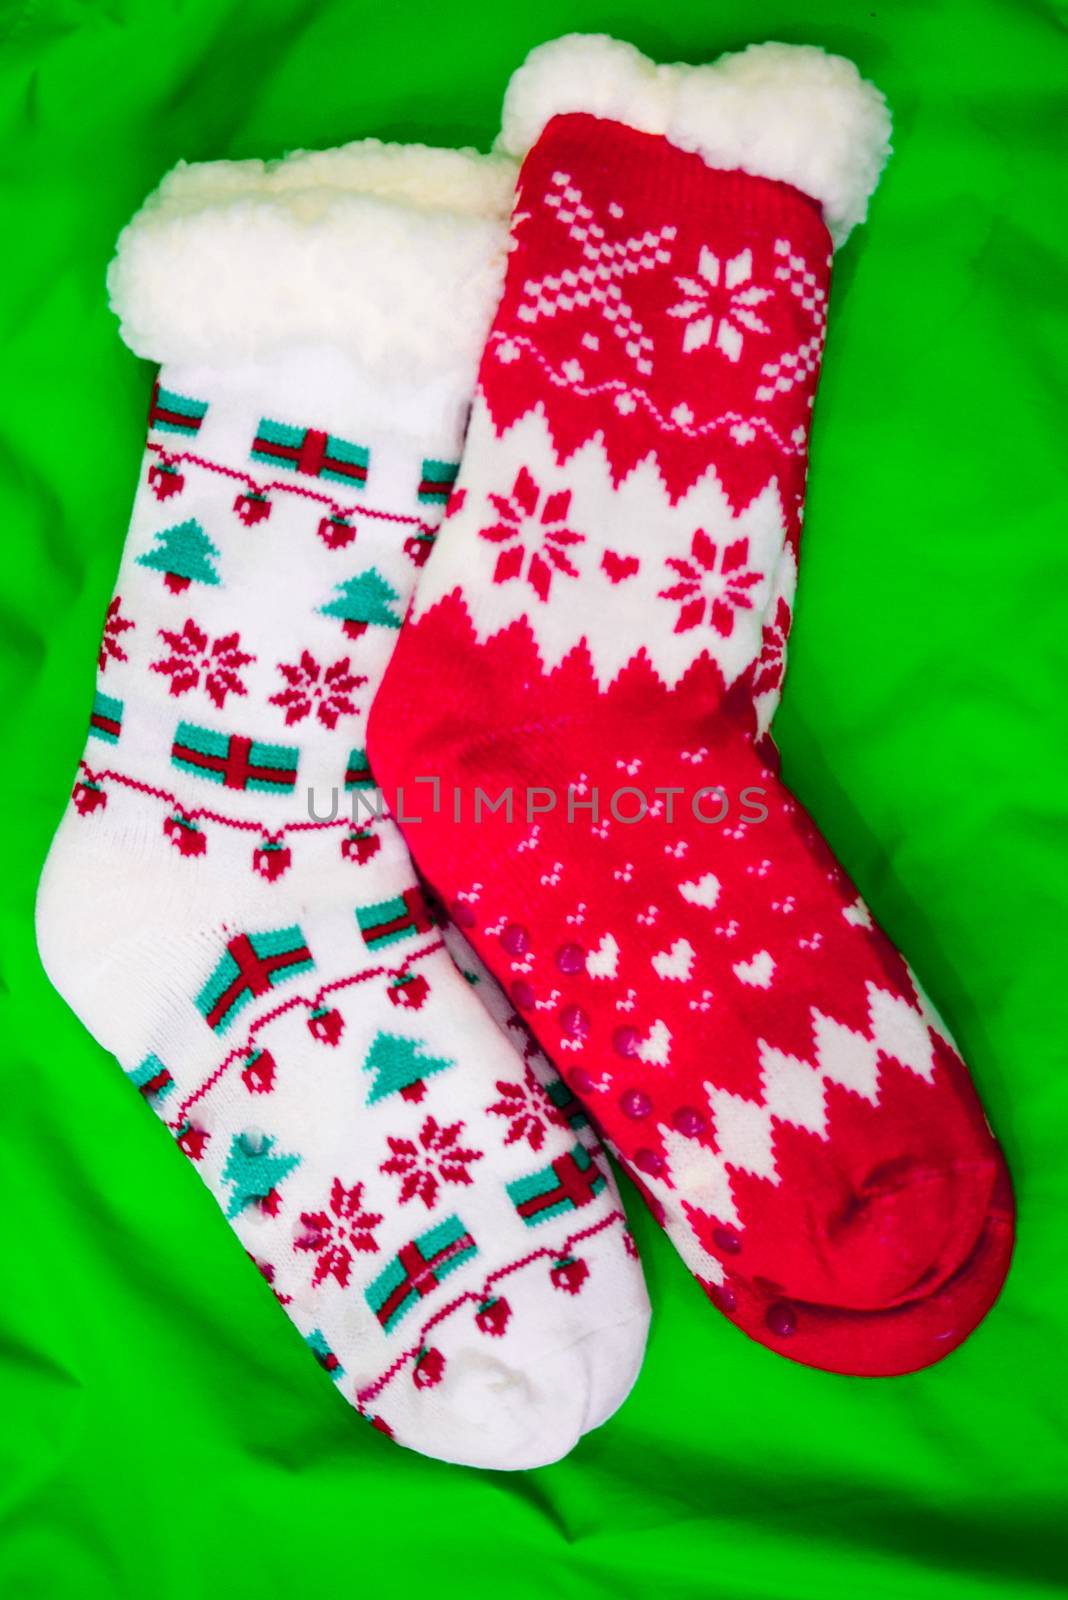 bright colored socks for Christmas or new year gifts and surprises by alexandr_sorokin